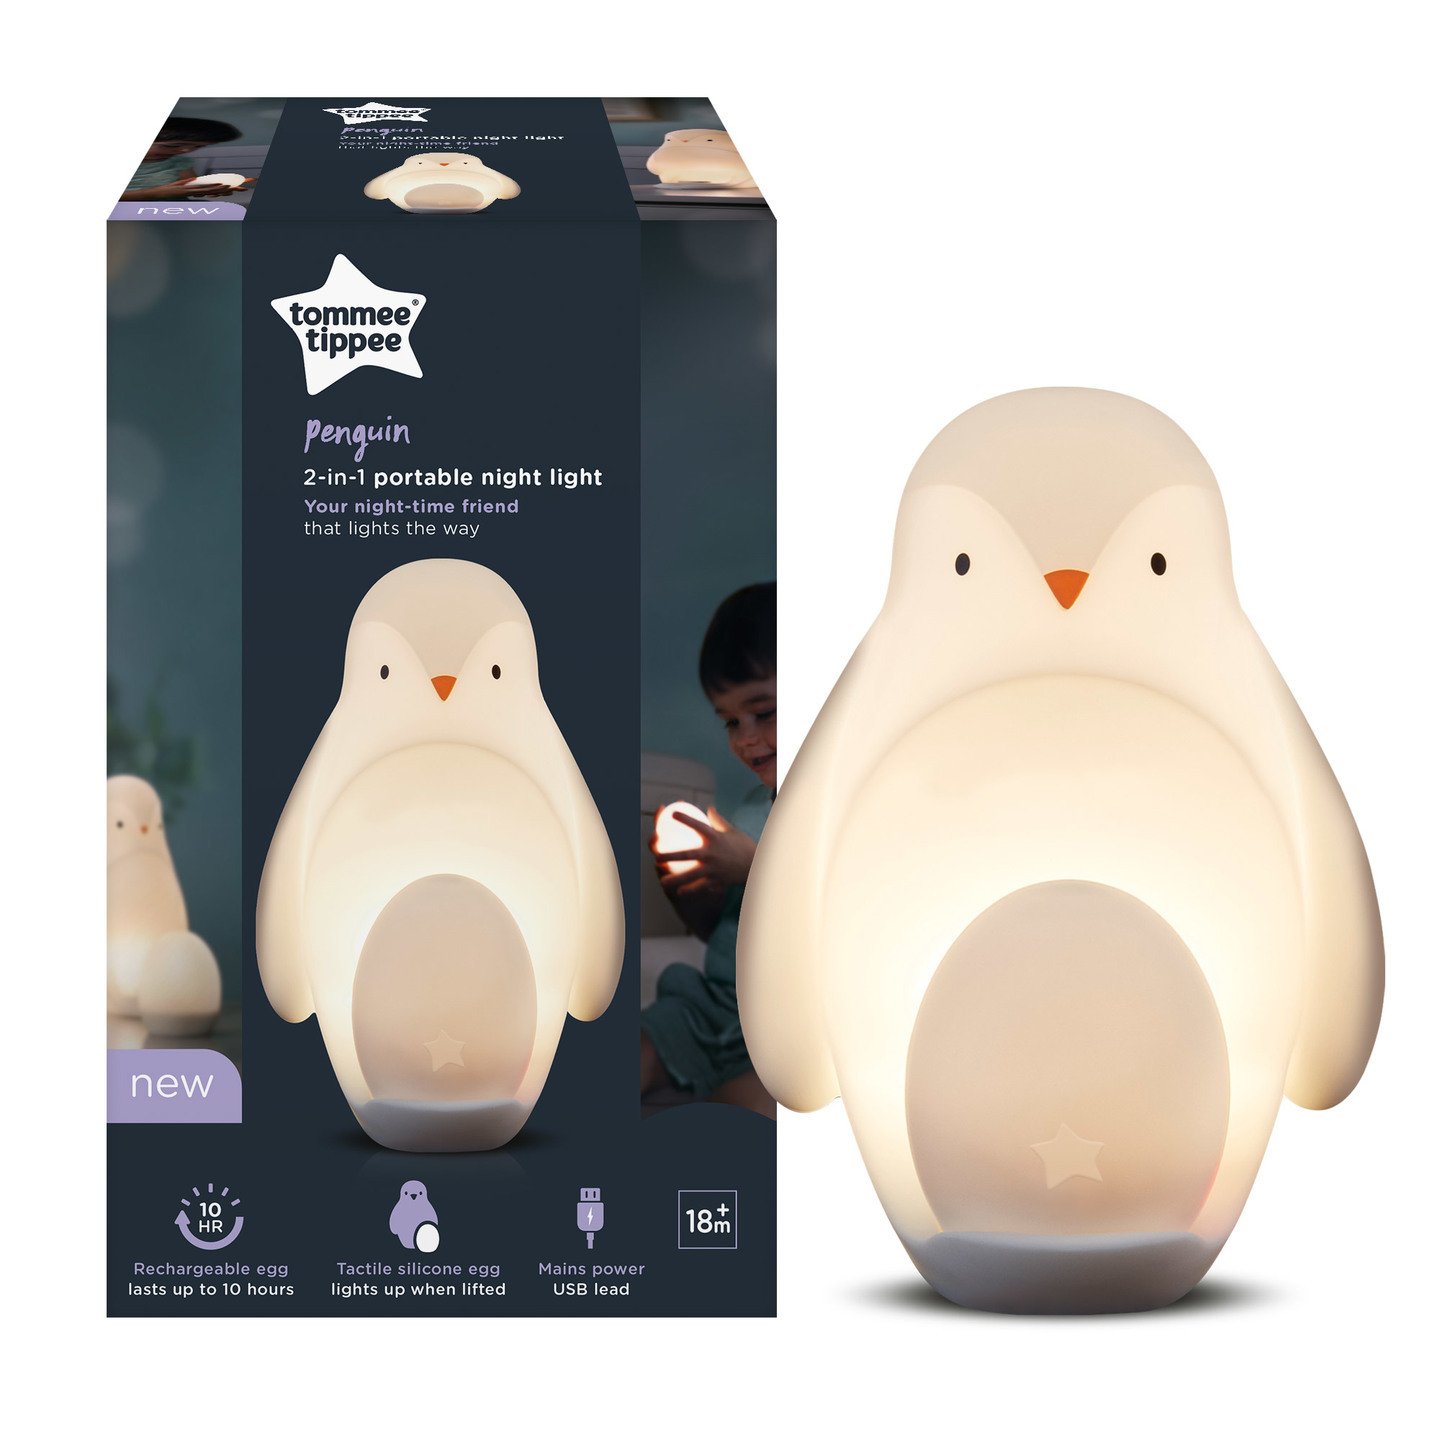 Tommee Tippee Penguin Night Light Review